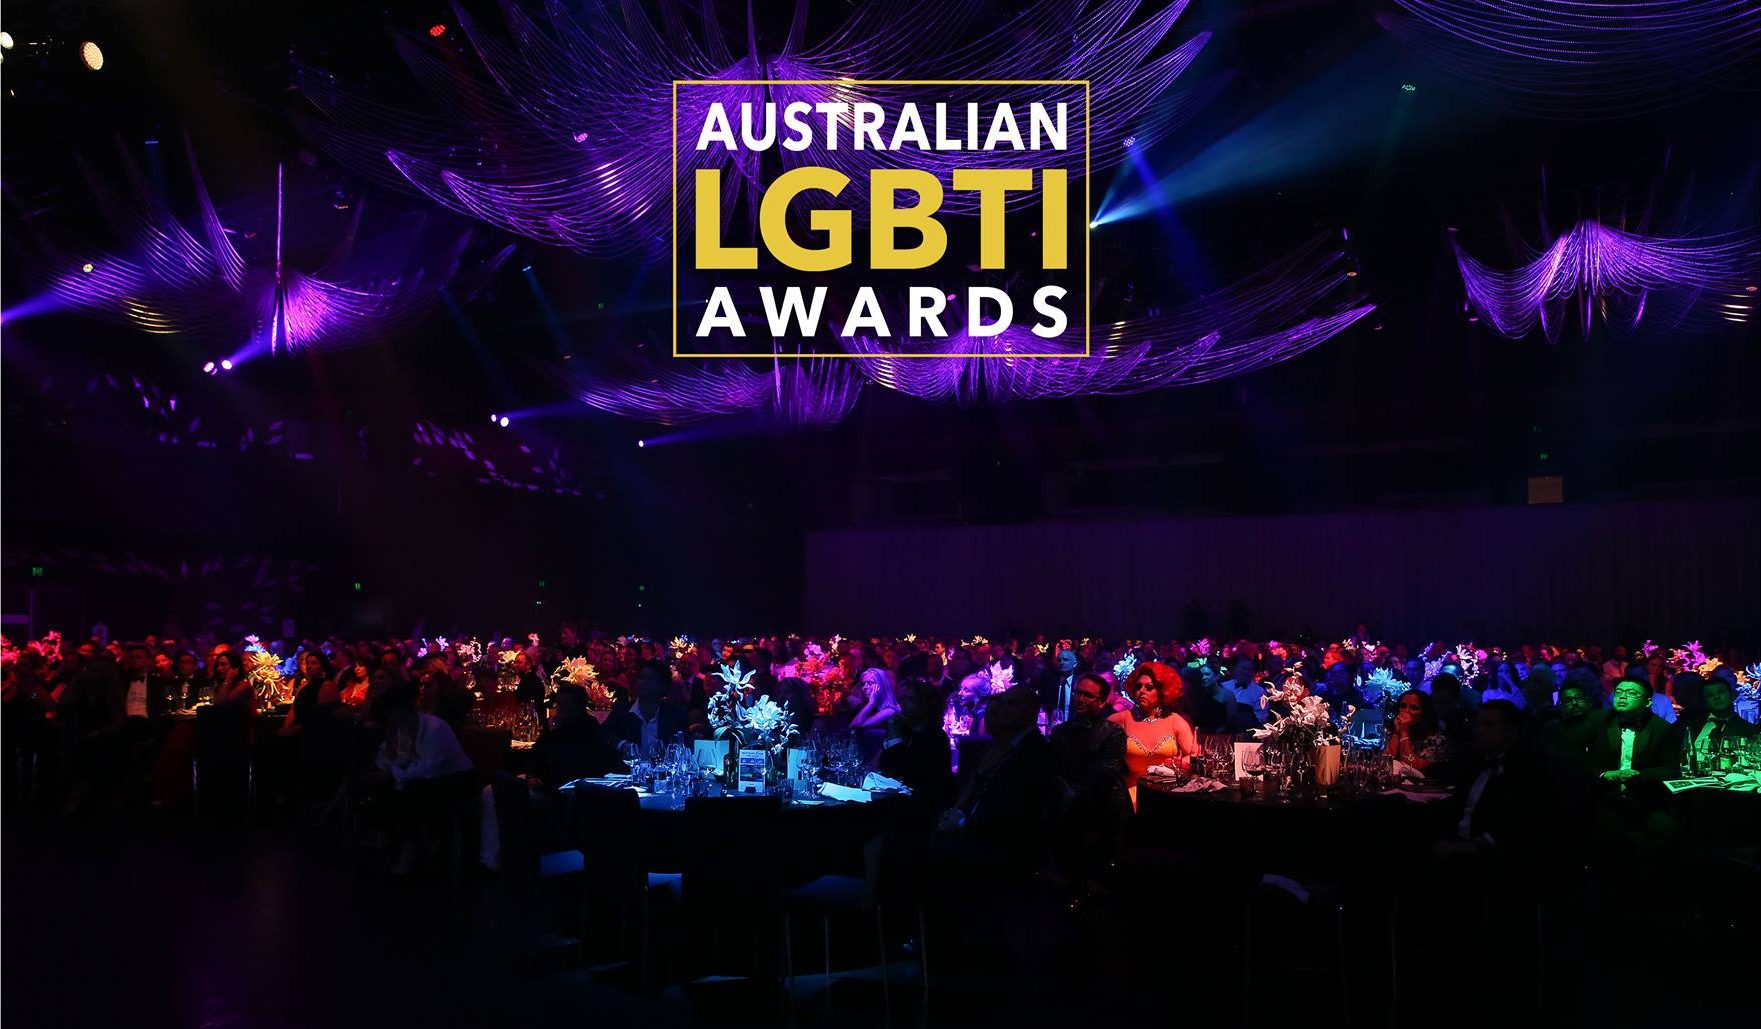 Australian LGBTI Awards in doubt after organisers go into liquidation